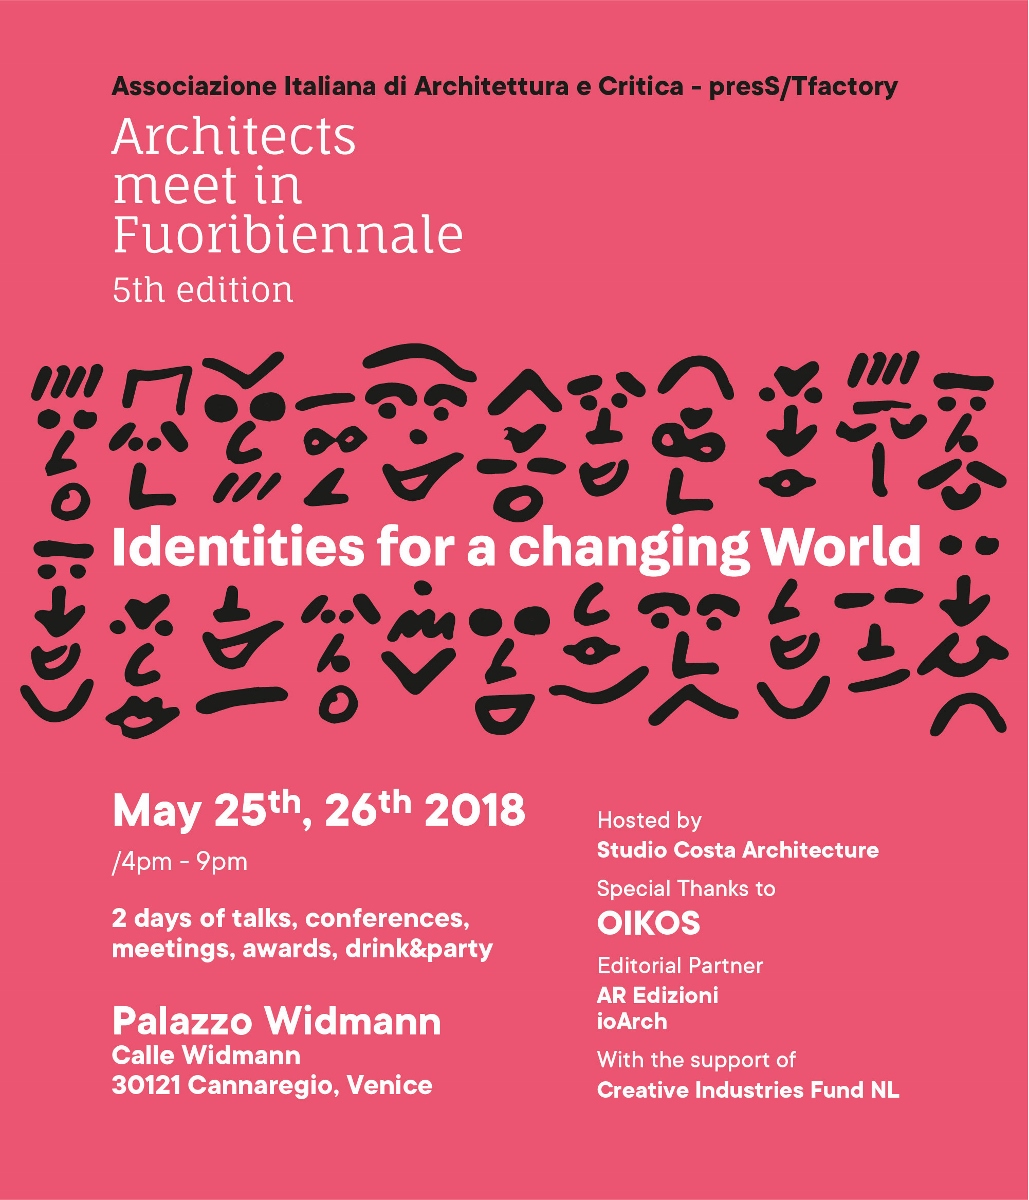 Architects meet in Fuoribiennale. Identities for a changing World